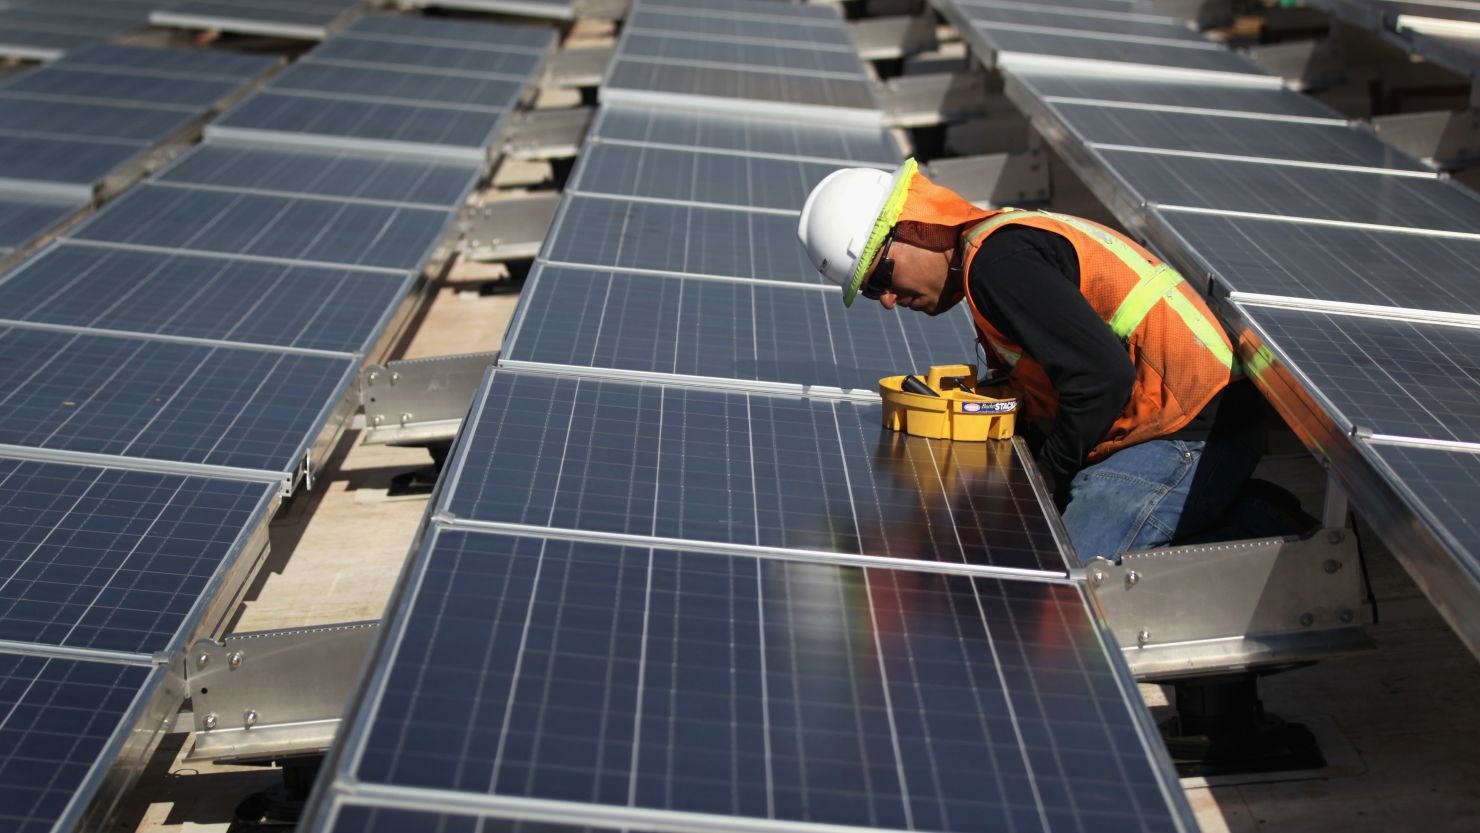 A worker finishes installing solar panels on October 1, 2010.